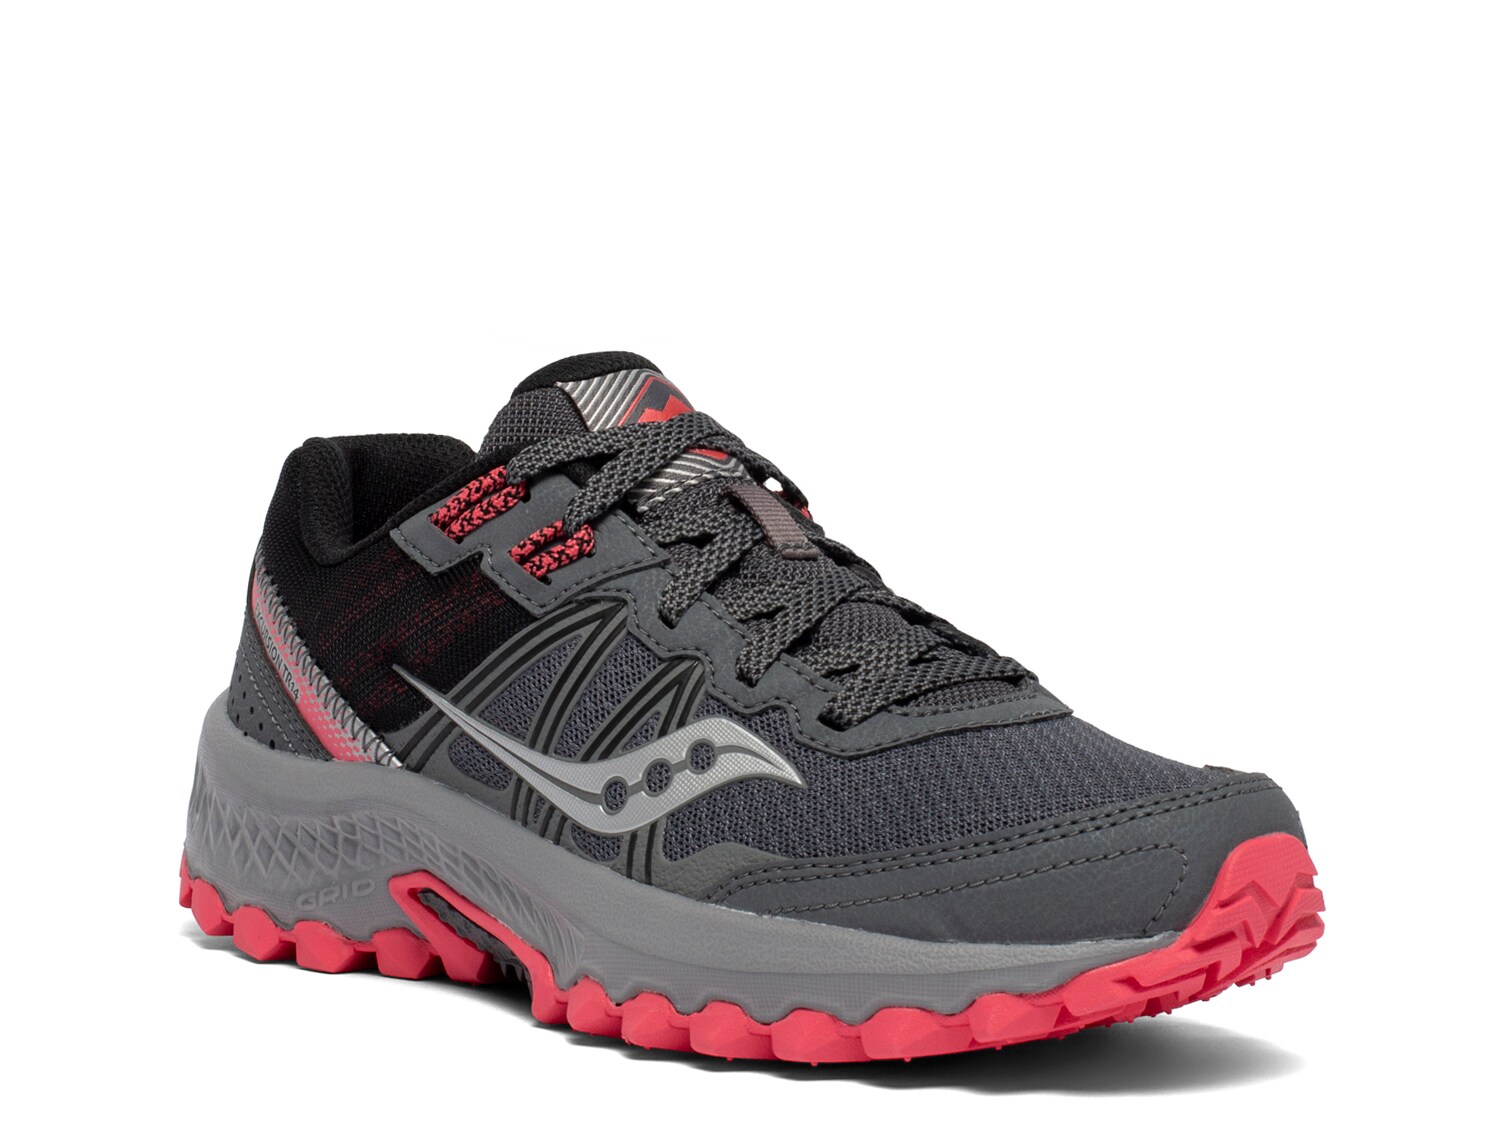 Saucony Excursion TR14 Trail Running Shoe - Women's - Free Shipping | DSW